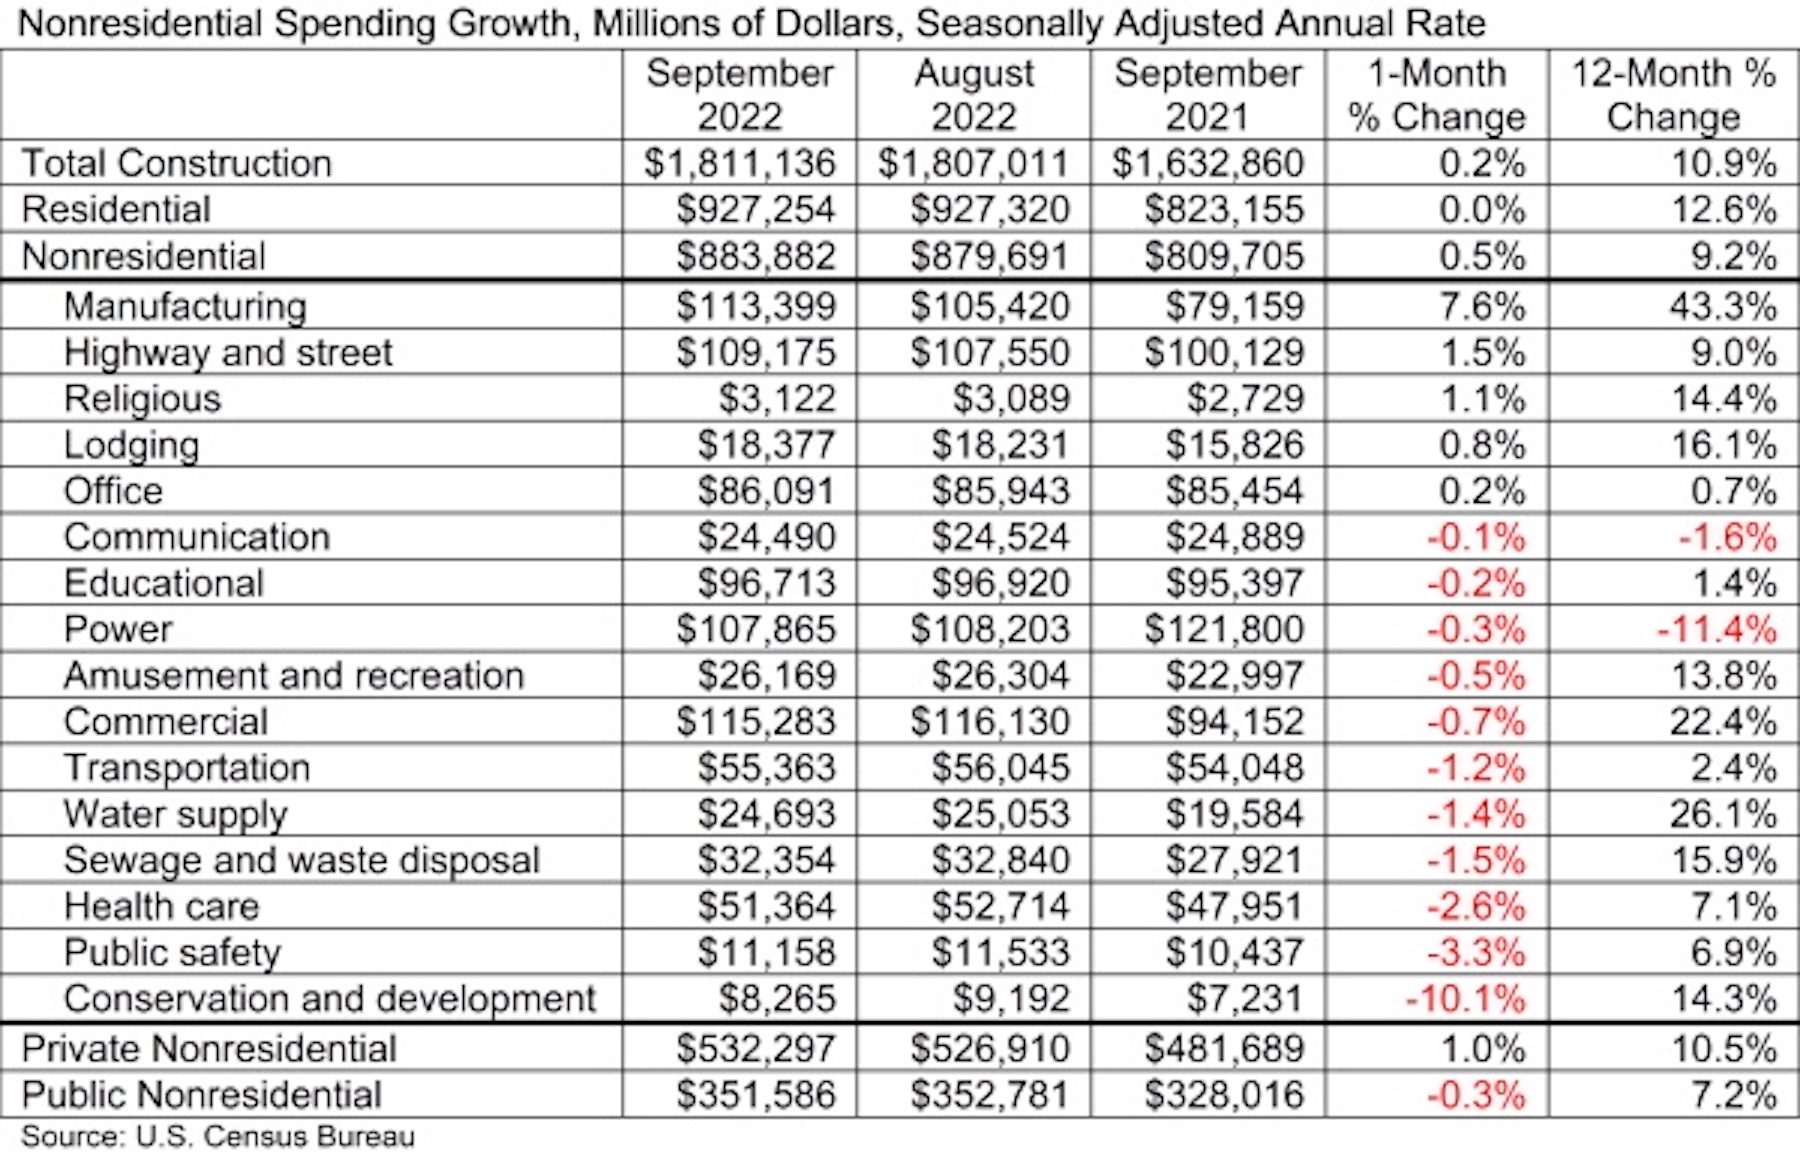 Nonresidential Spending Growth Table